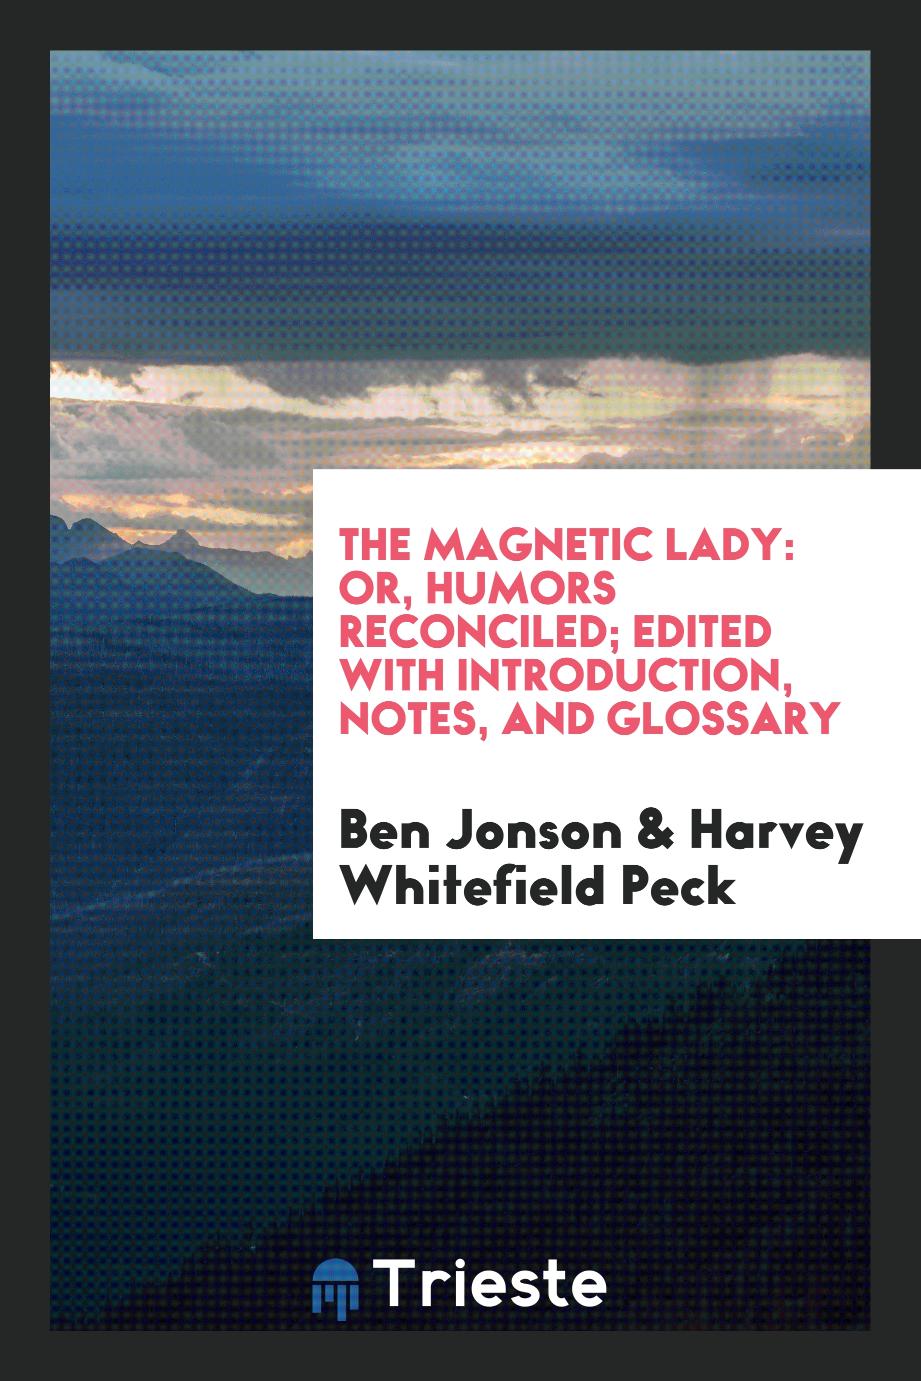 The Magnetic Lady: Or, Humors Reconciled; Edited with Introduction, Notes, and Glossary